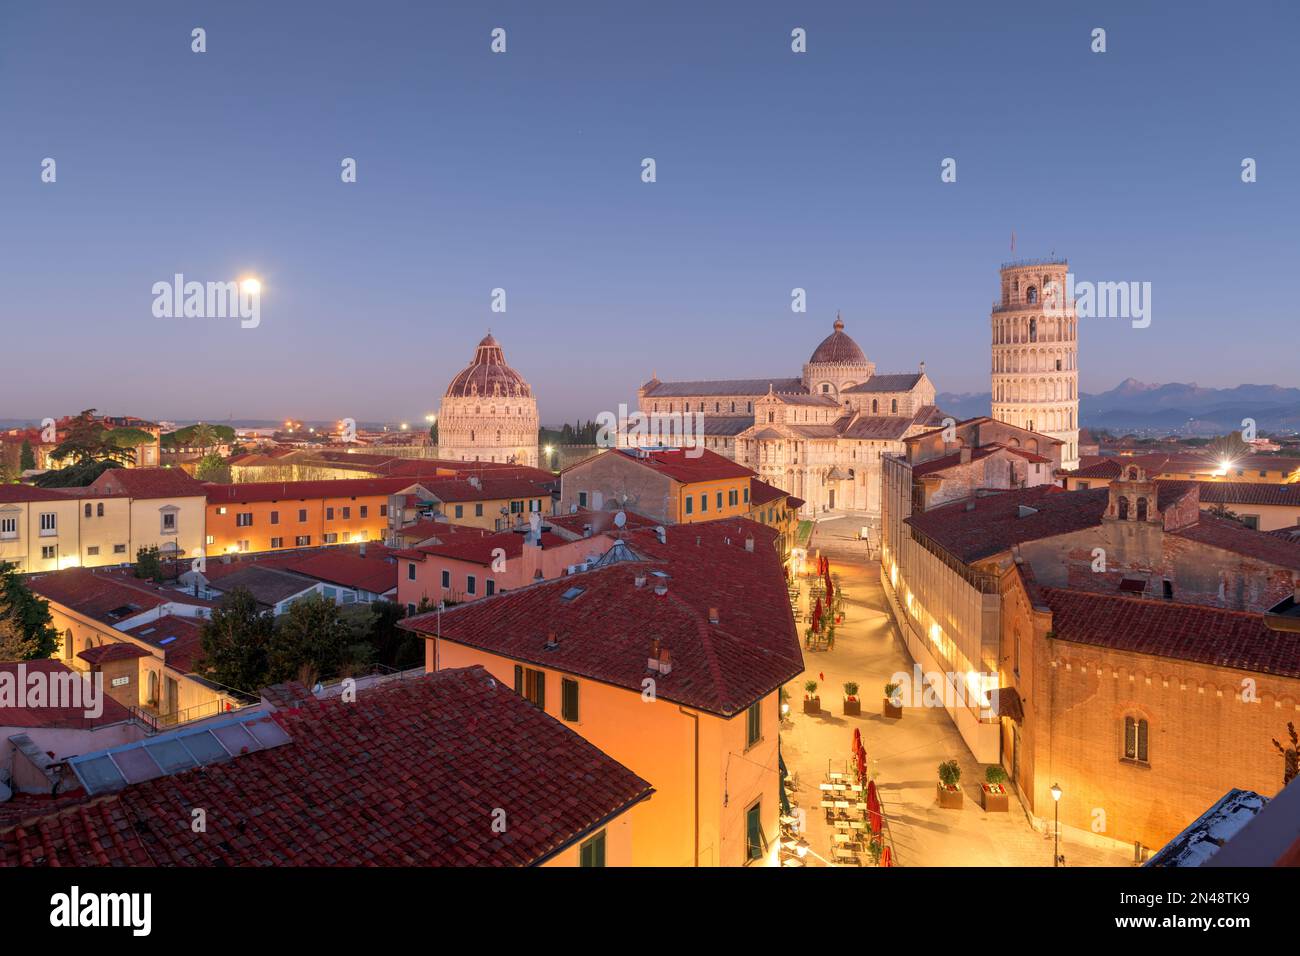 Pisa, Italy townscape view at night. Stock Photo